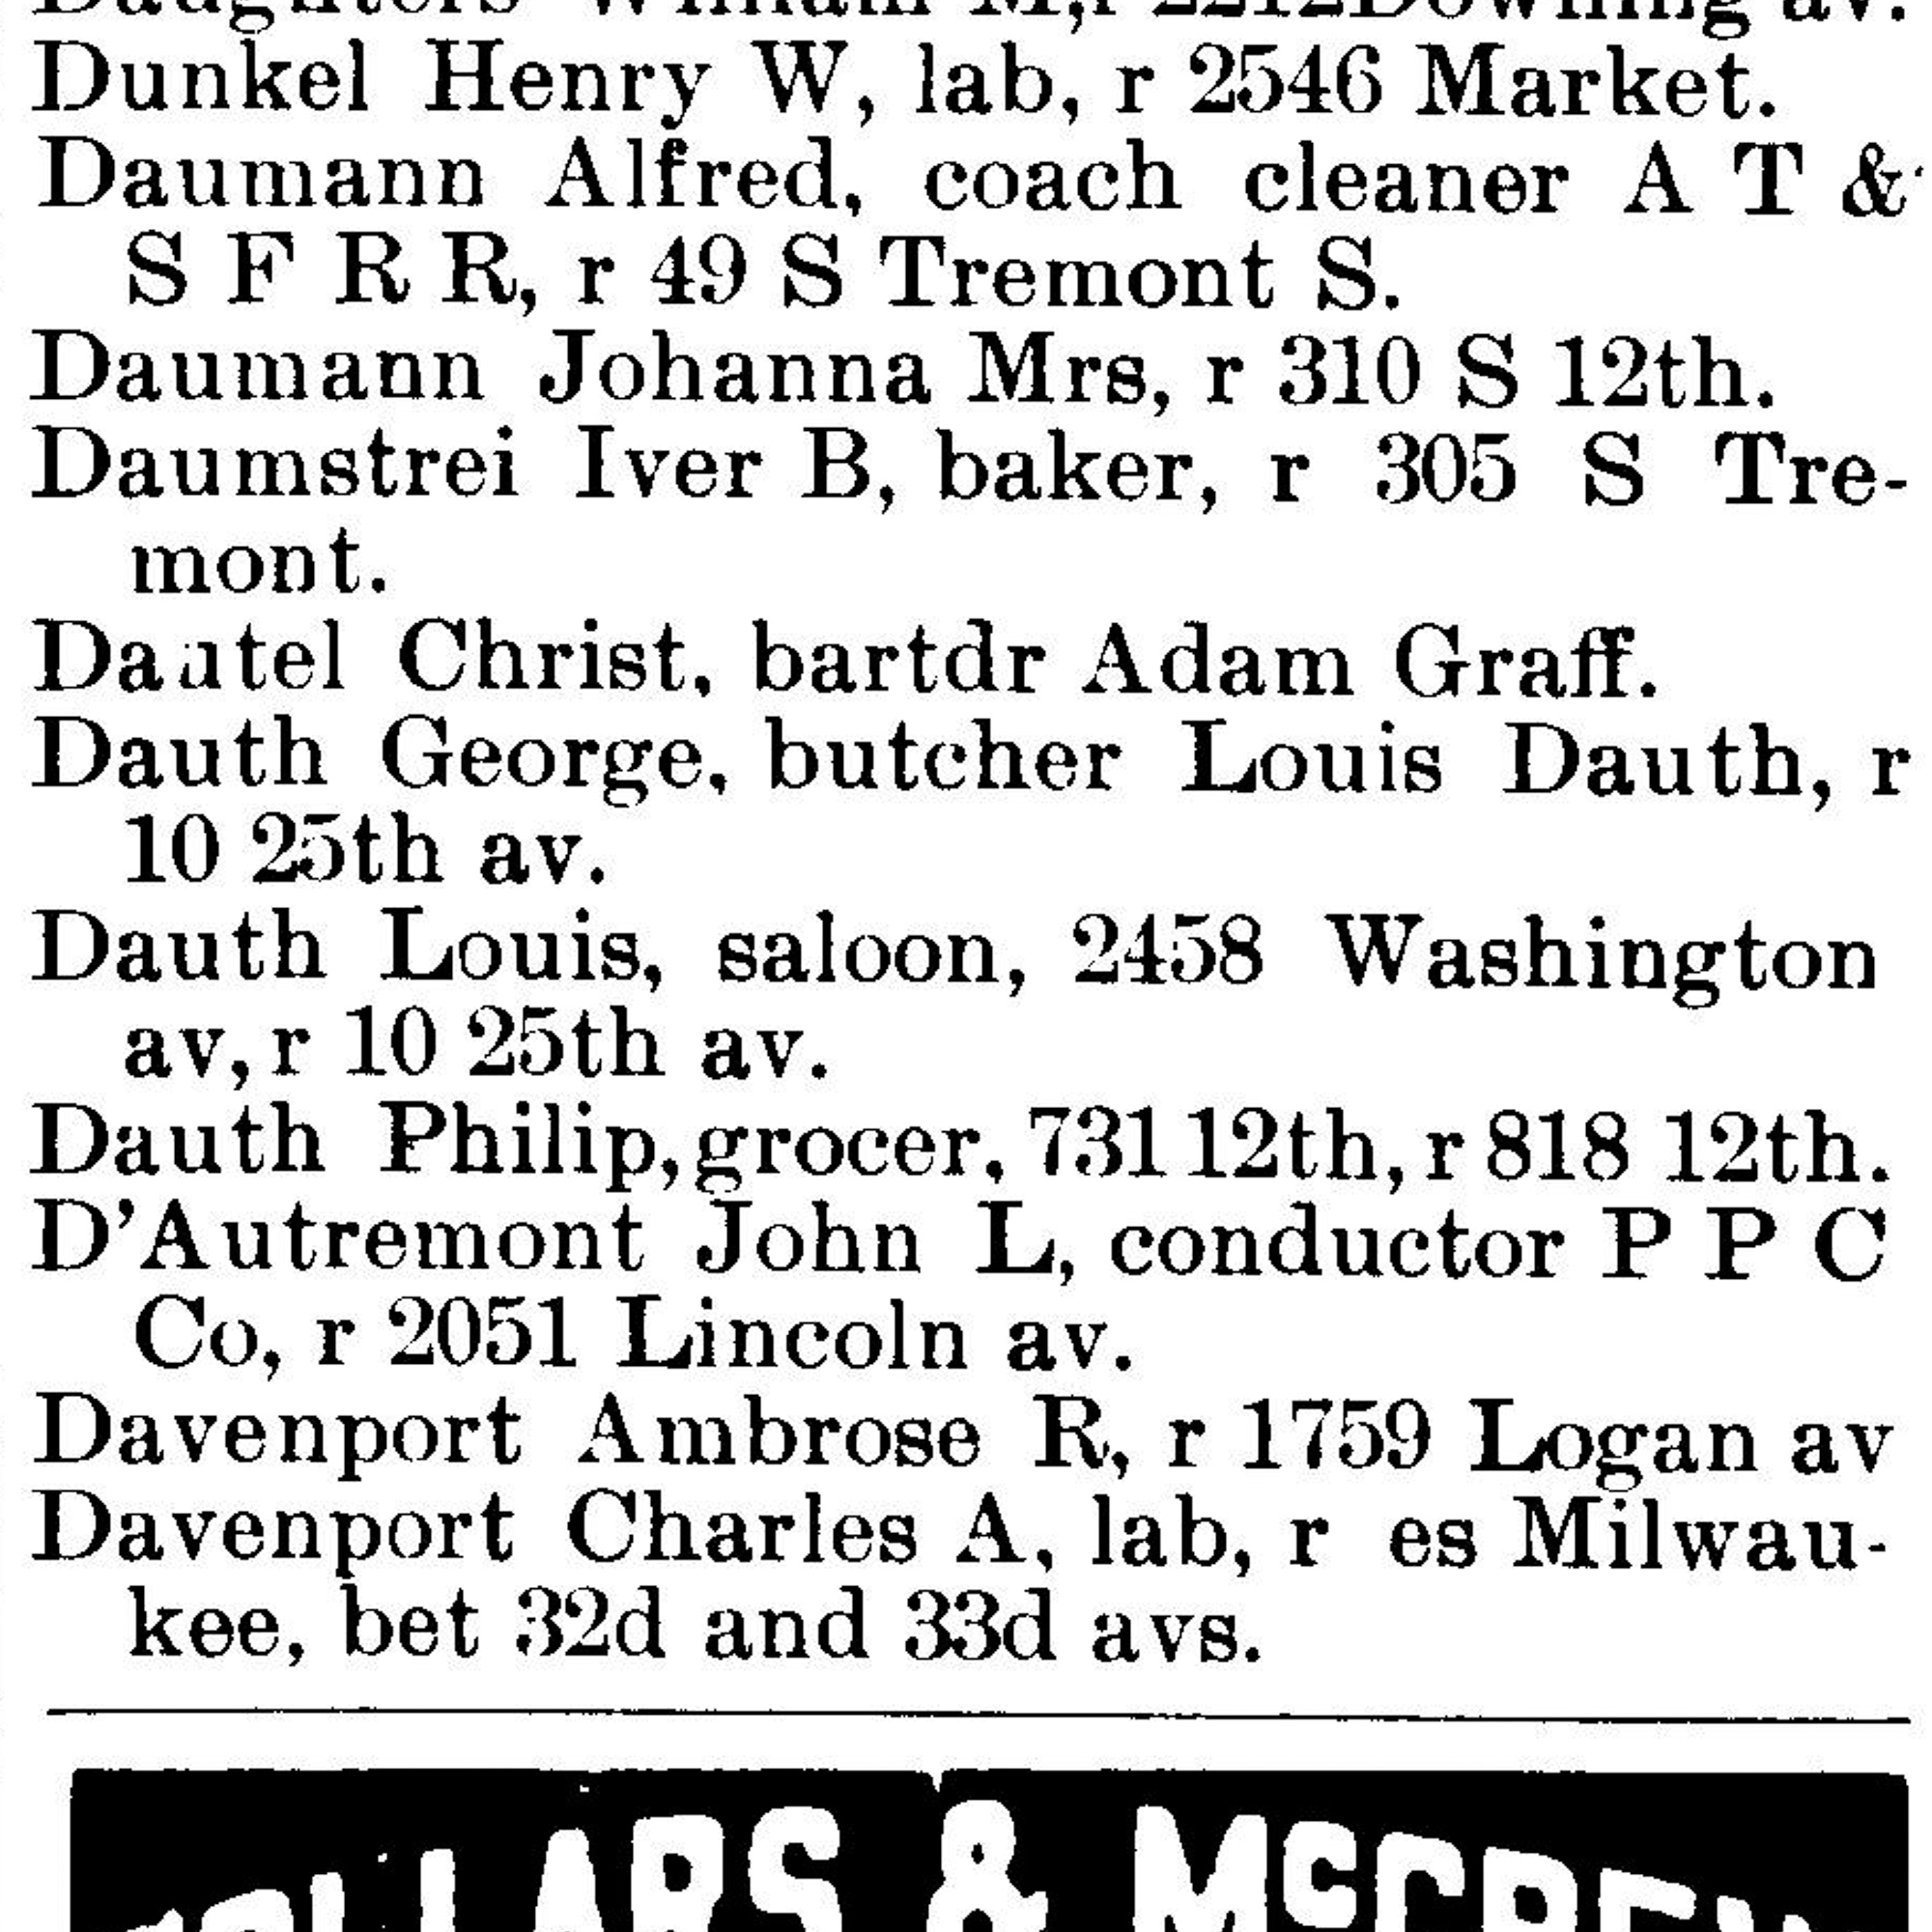 Dauth Family Archive - 1894 - Denver Directory - Entry for George, Louis, and Philip Dauth